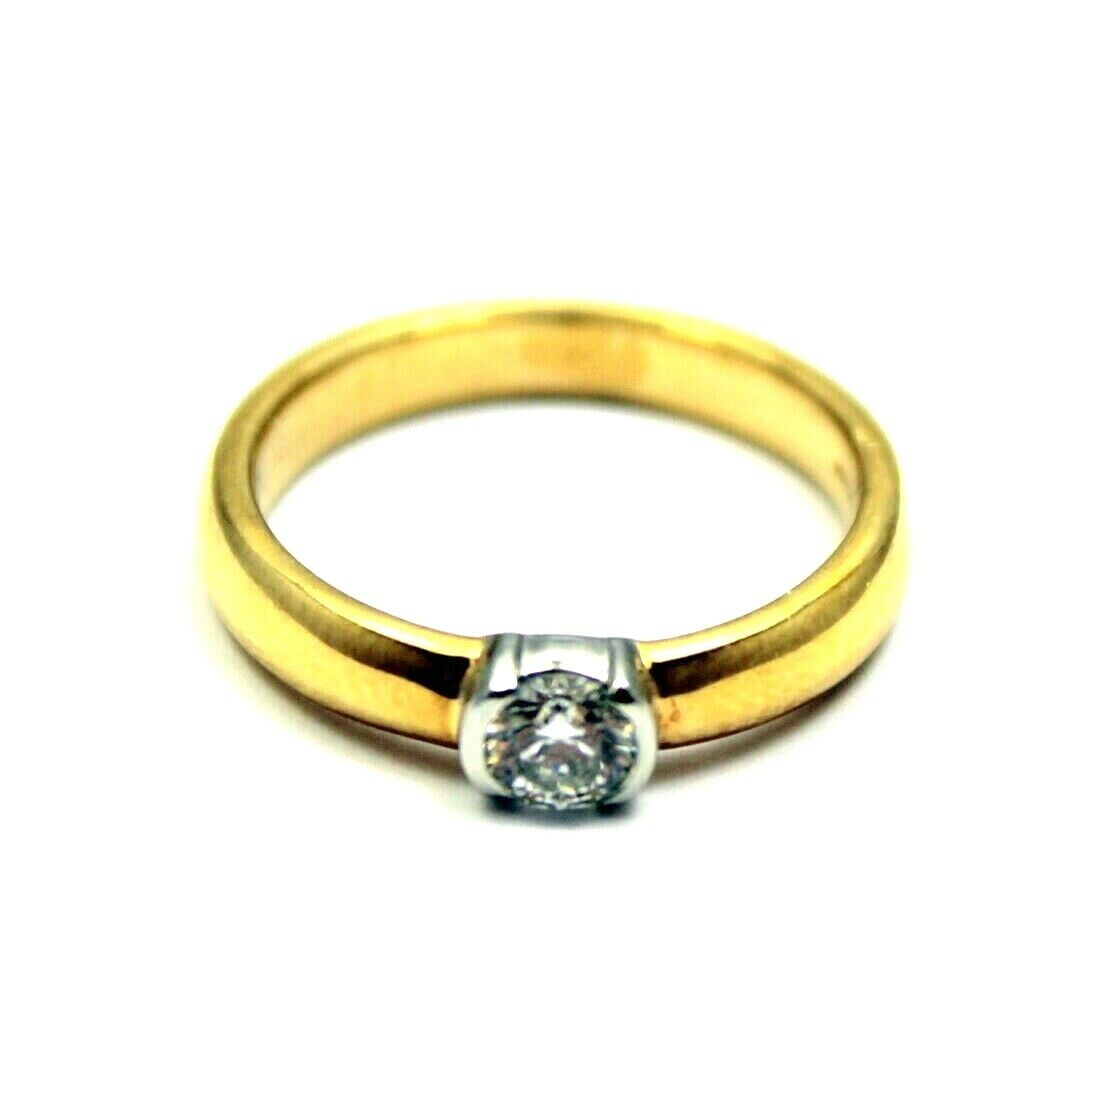 Tiffany & Co. Jewelry & Watches:Vintage & Antique Jewelry:Rings Authentic Tiffany & Co. 18k + Platinum 0.33ct Diamond I/VS1 Engagement Ring Cert